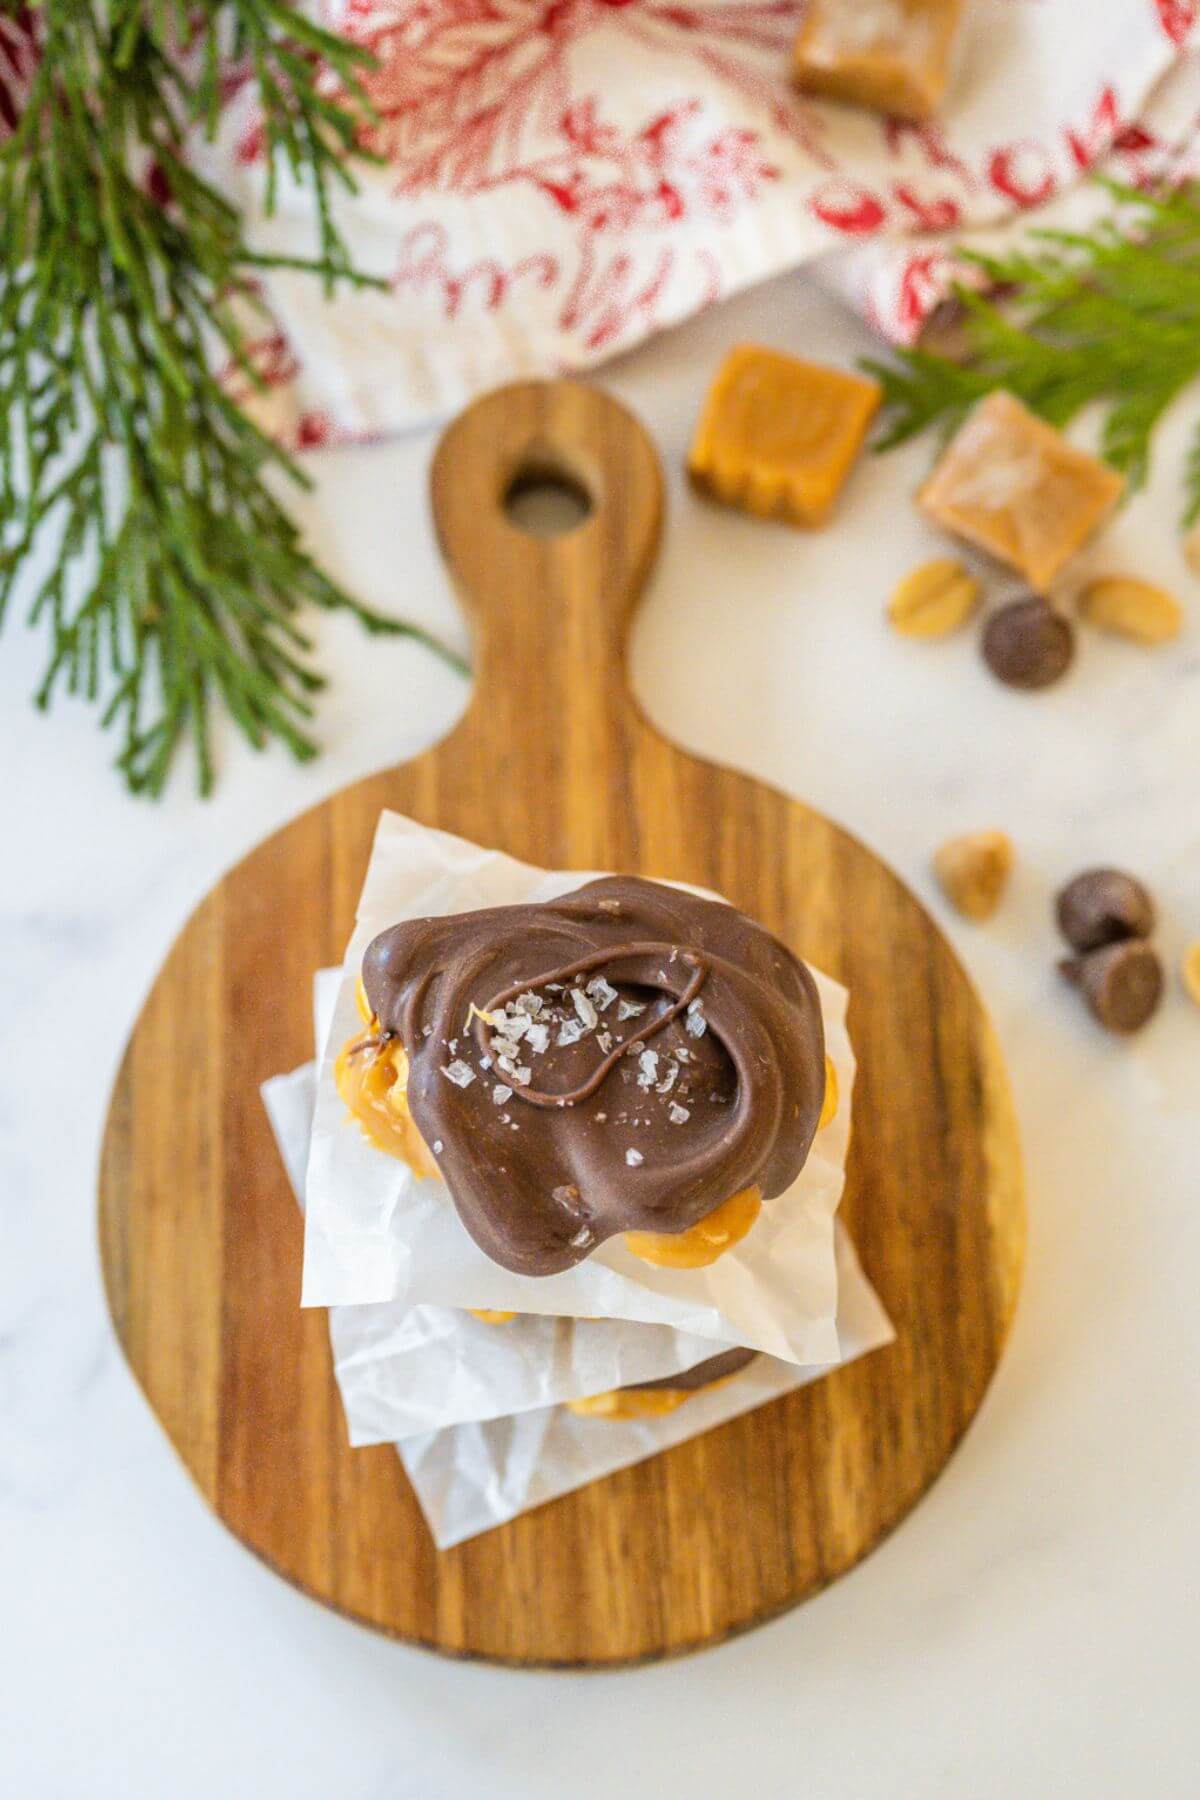 A wooden cut board is shown from top with the chocolate peanut clusters centered in the middle and surrounded by holiday decor.